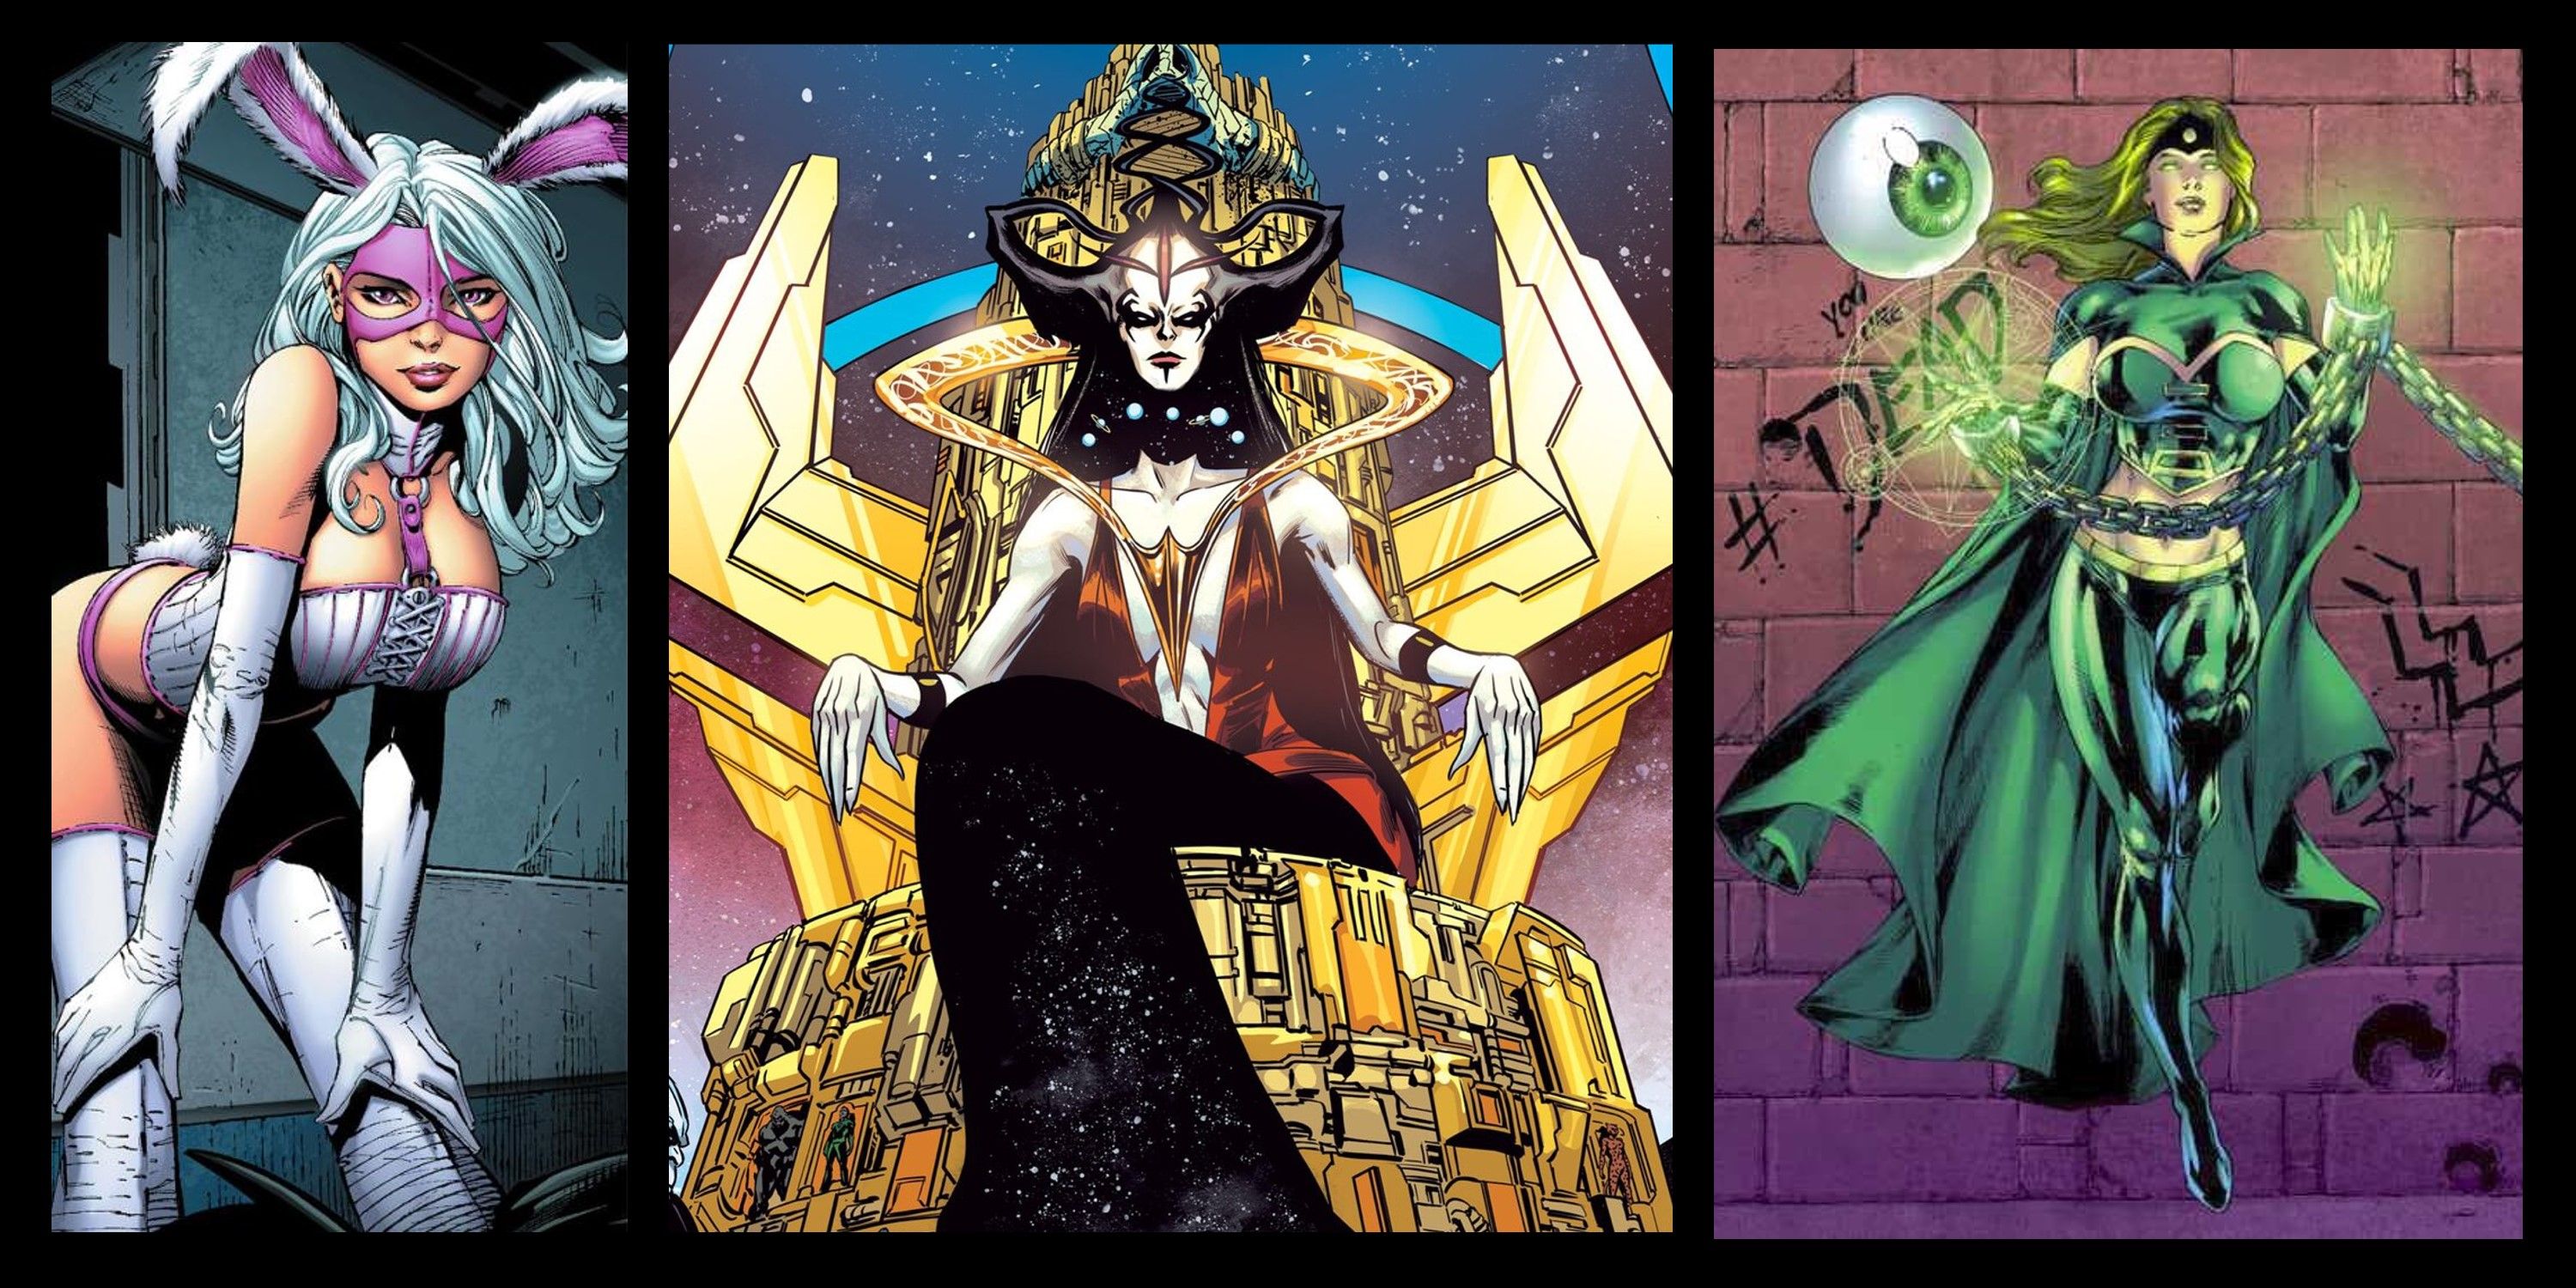 Split Image of White Rabbit, Perpetua and Emerald Empress from DC Comics